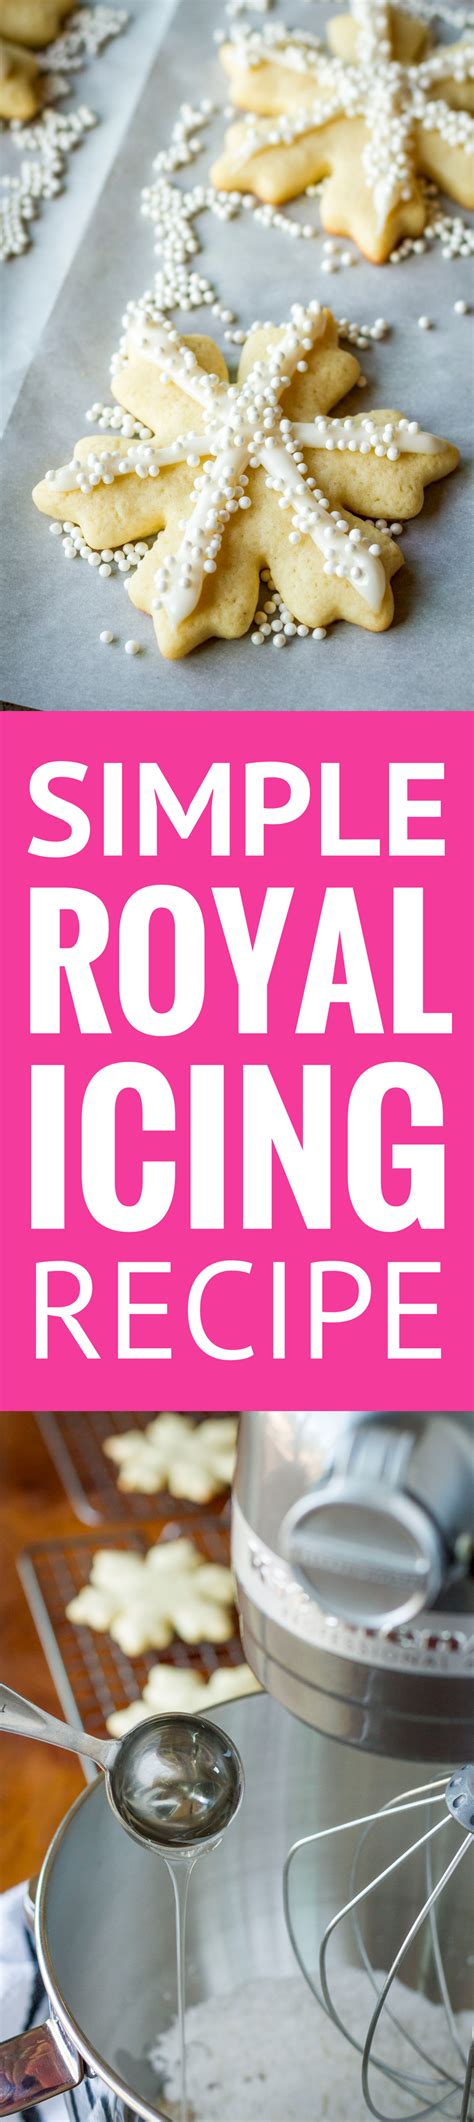 Royal icing transfer templates all ready to go! Simple Royal Icing Recipe -- this royal icing is SO ridiculously easy to make! No egg whites, no ...